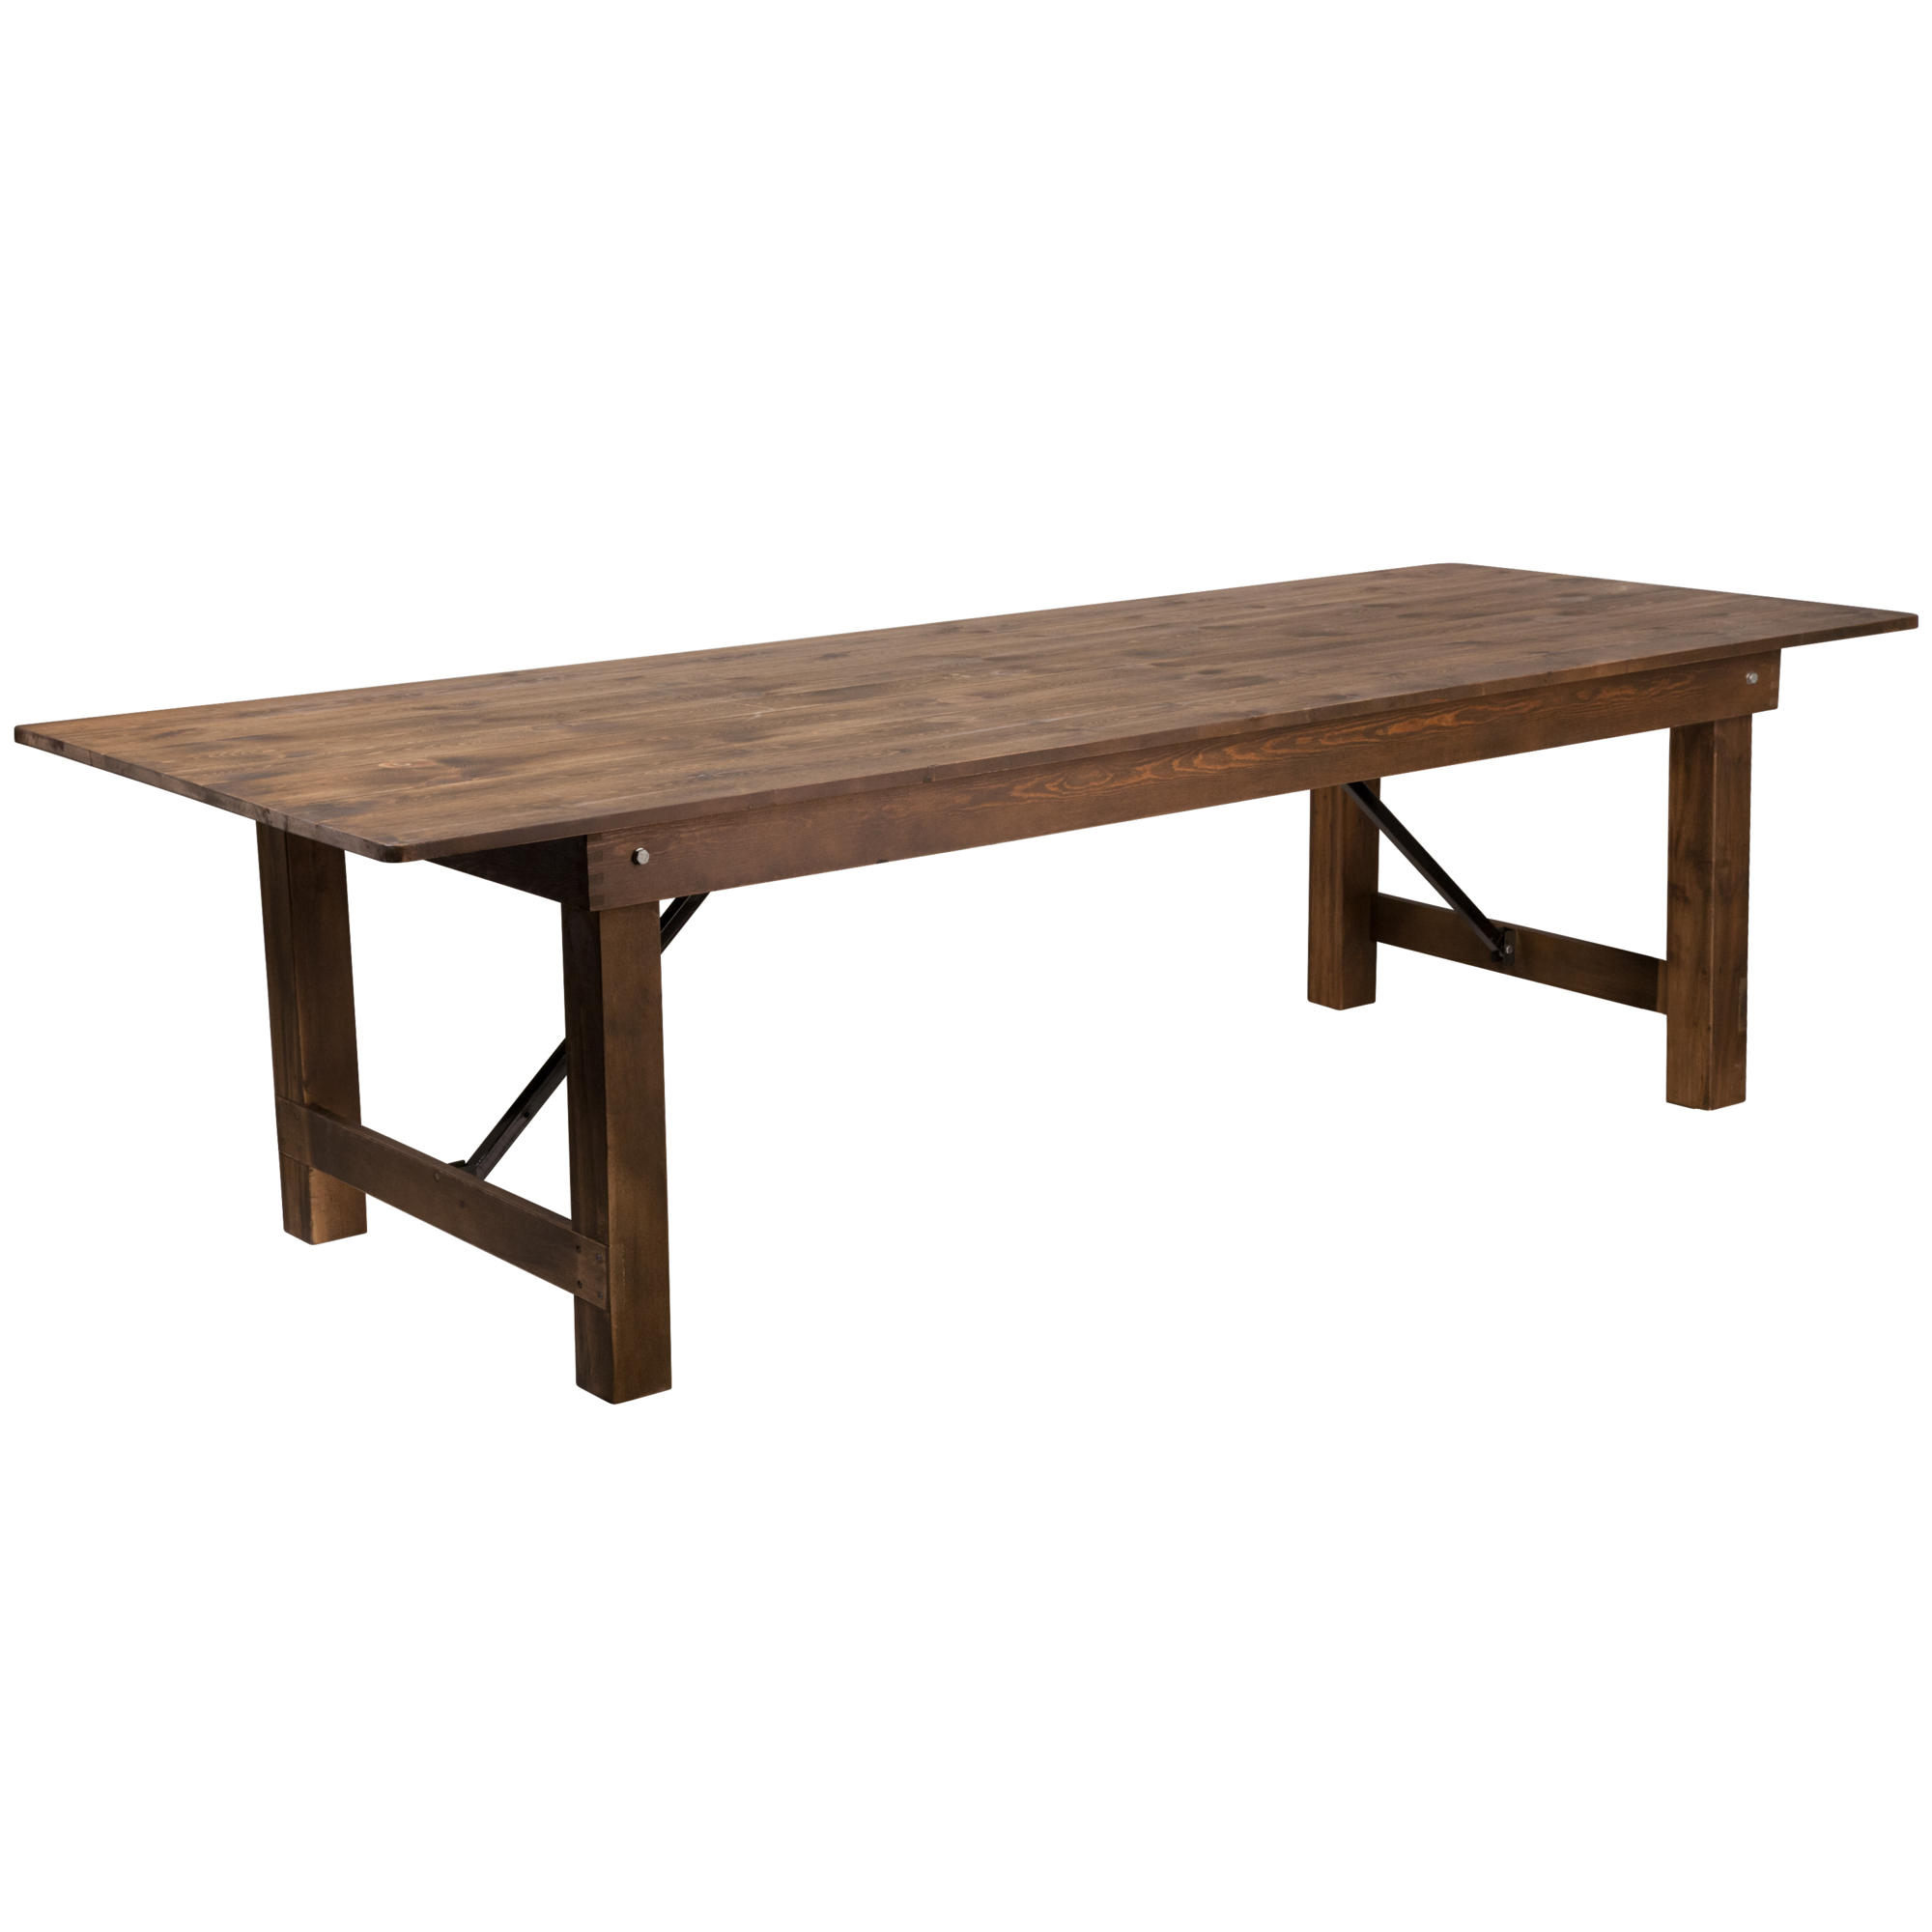 Flash Furniture, 9ft. x 40Inch Antique Solid Pine Folding Farm Table, Height 30 in, Width 40 in, Length 108 in, Model XAF108X40